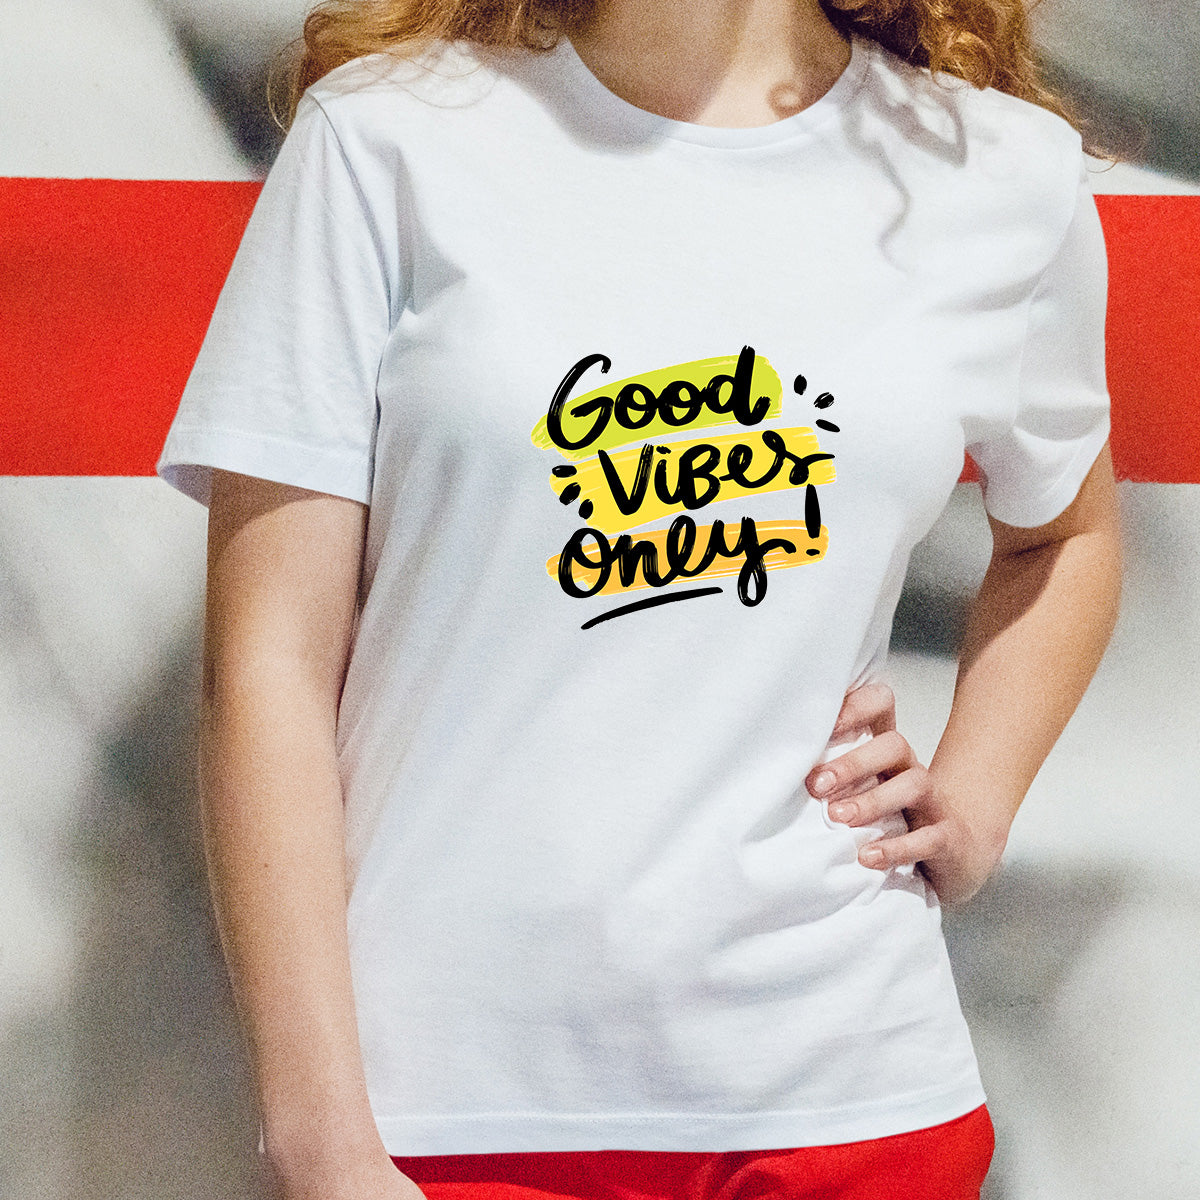 Good Vibes Only - Printed Cotton T- Shirt - White